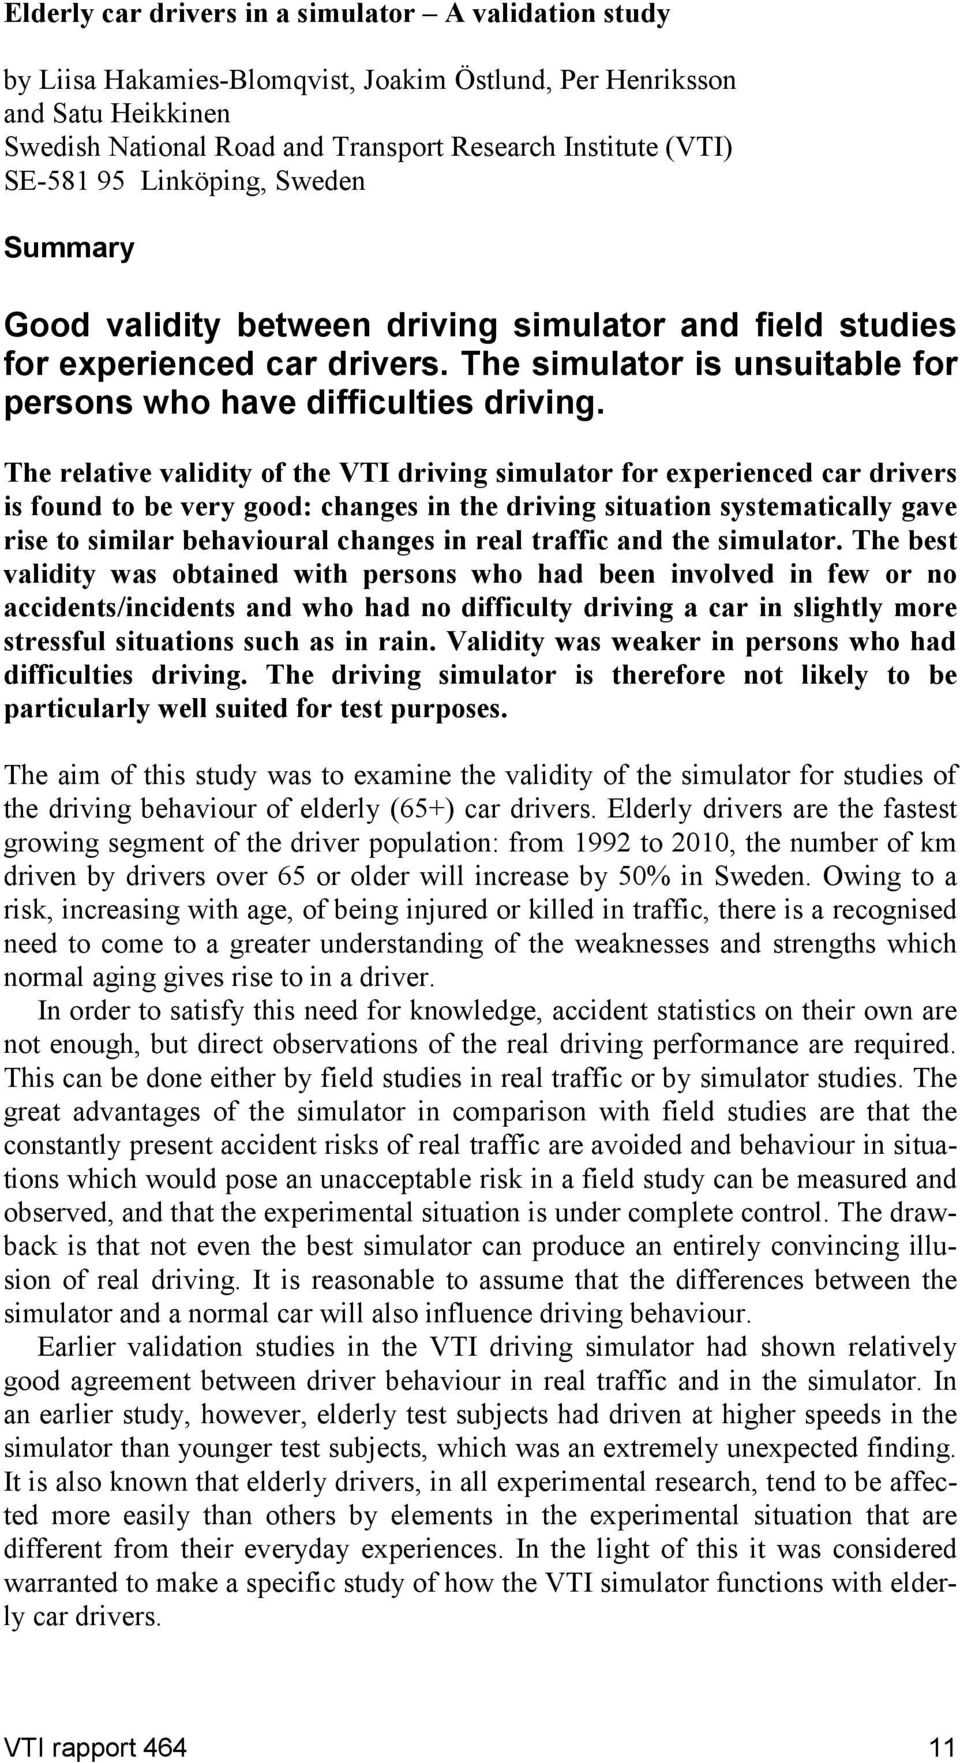 The relative validit of the VTI driving simulator for experienced car drivers is found to be ver good: changes in the driving situation sstematicall gave rise to similar behavioural changes in real